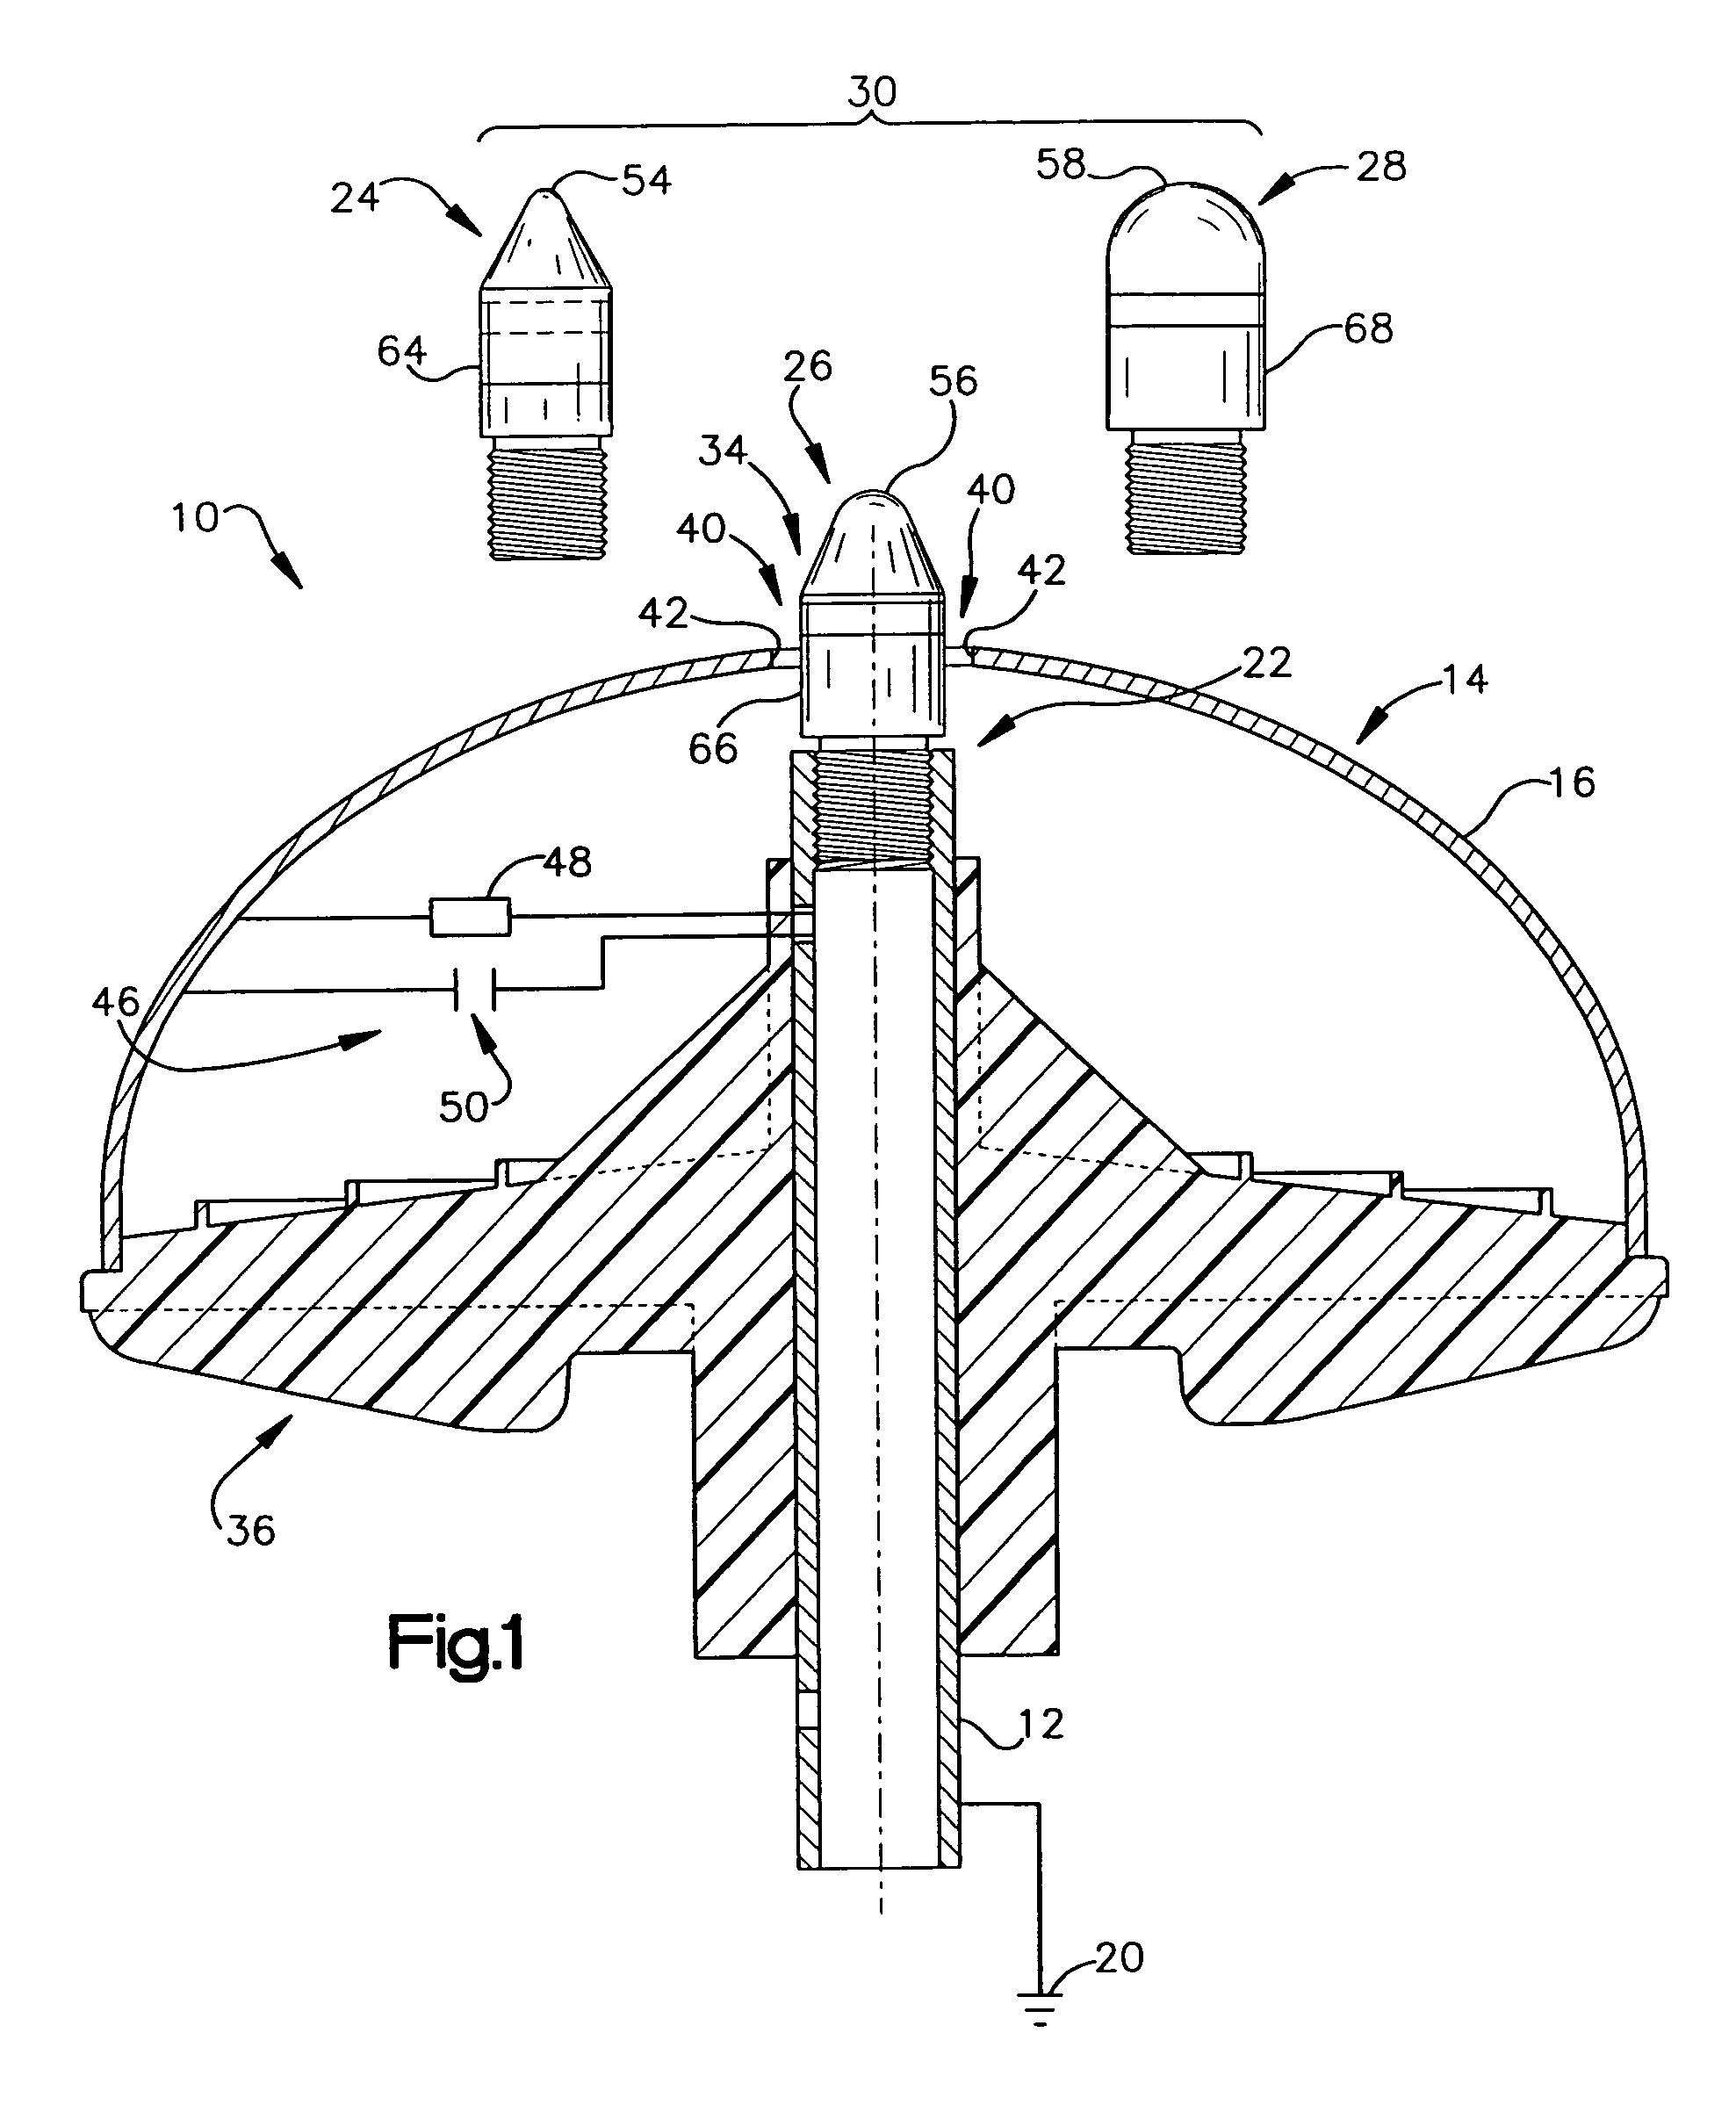 Lightning protection device and method